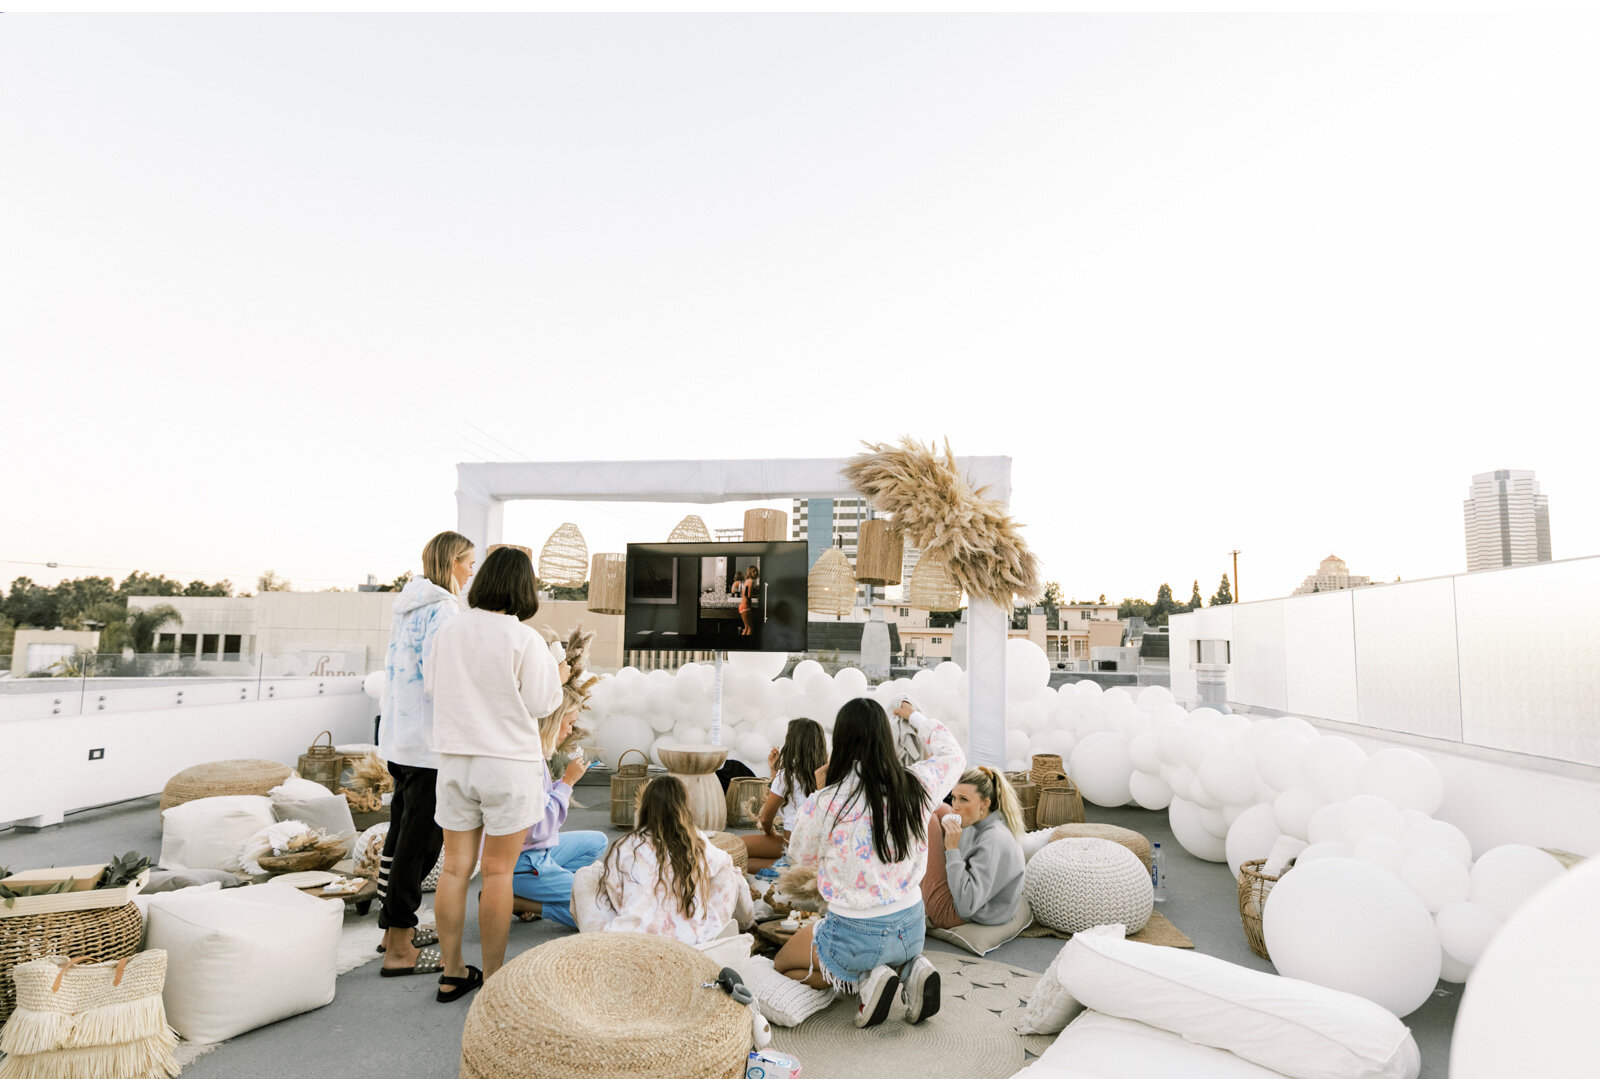 Rooftop-Movie-Night-LA-Rooftops-Movie-Event-Ideas-The-Bachelor-Contestant-Natalie-Schutt-photography_09.jpg